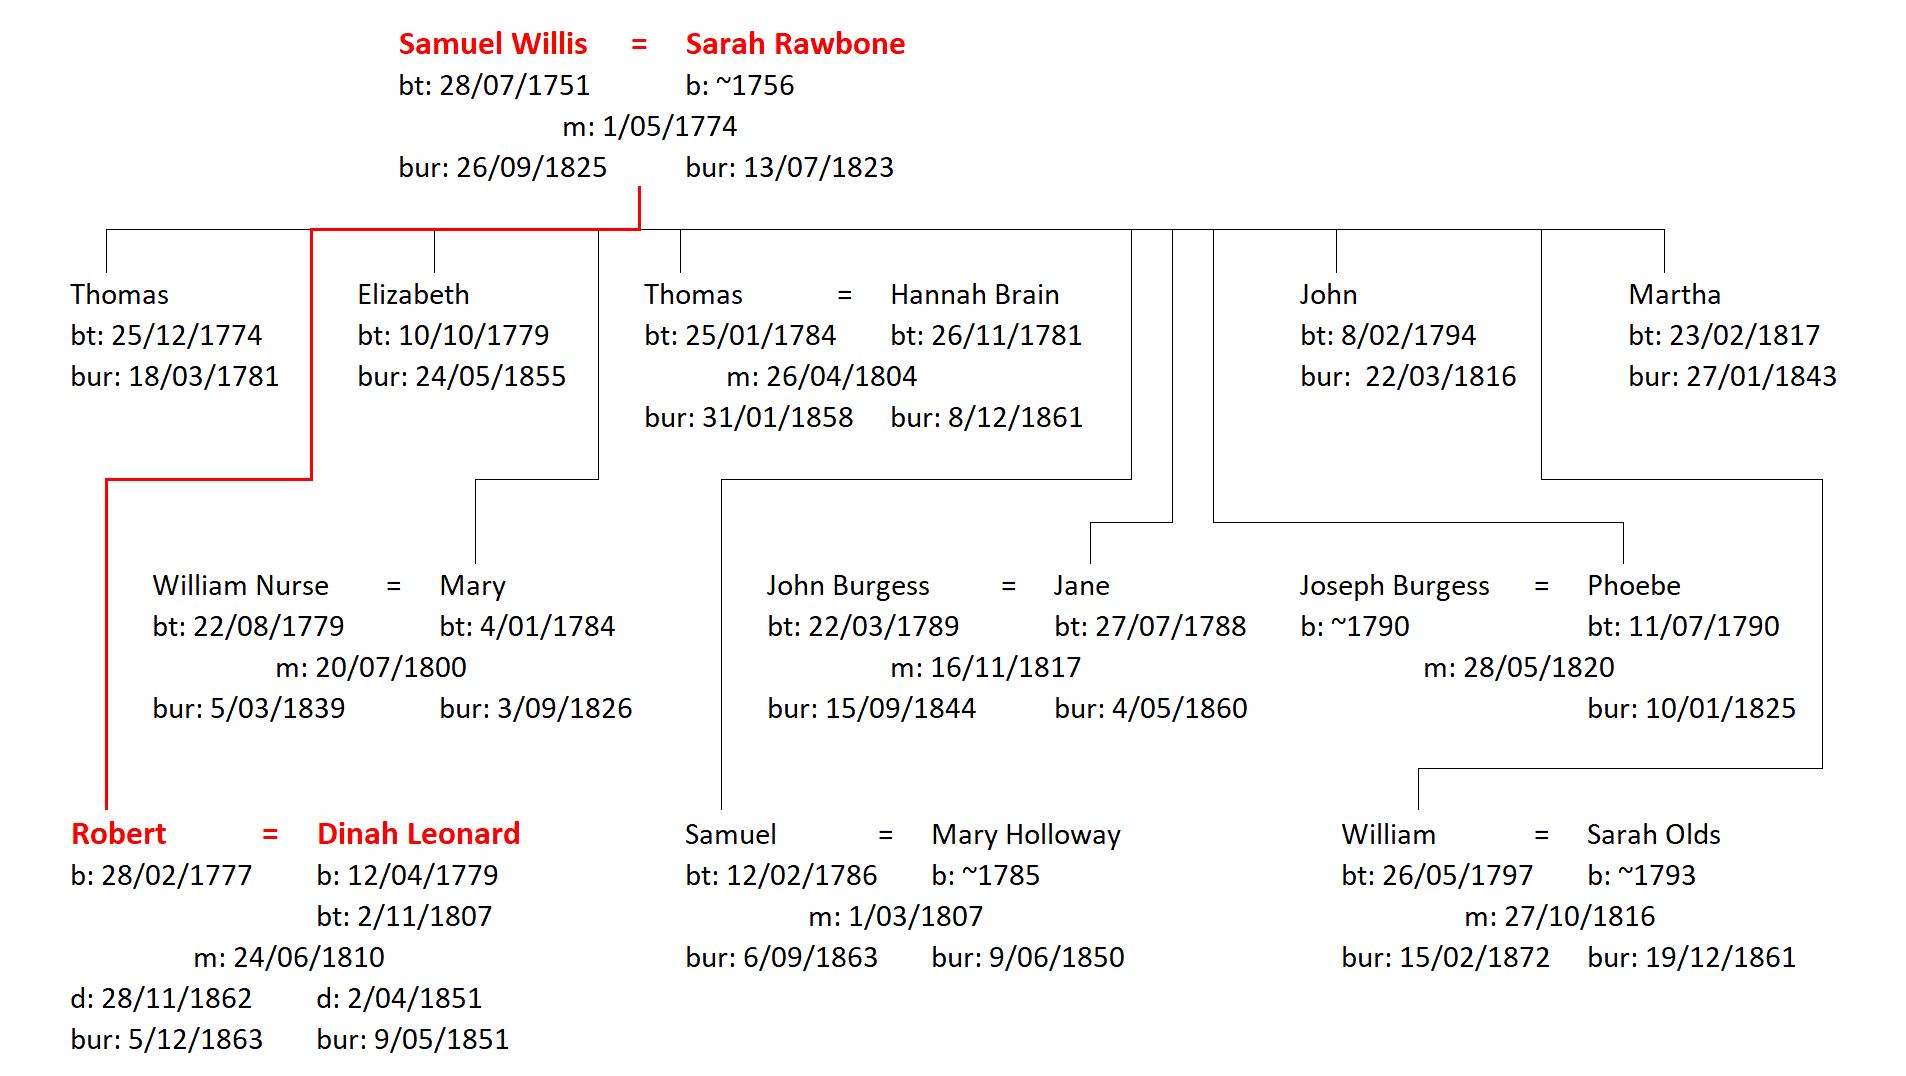 Figure 4: The Family of Samuel and Sarah Willis